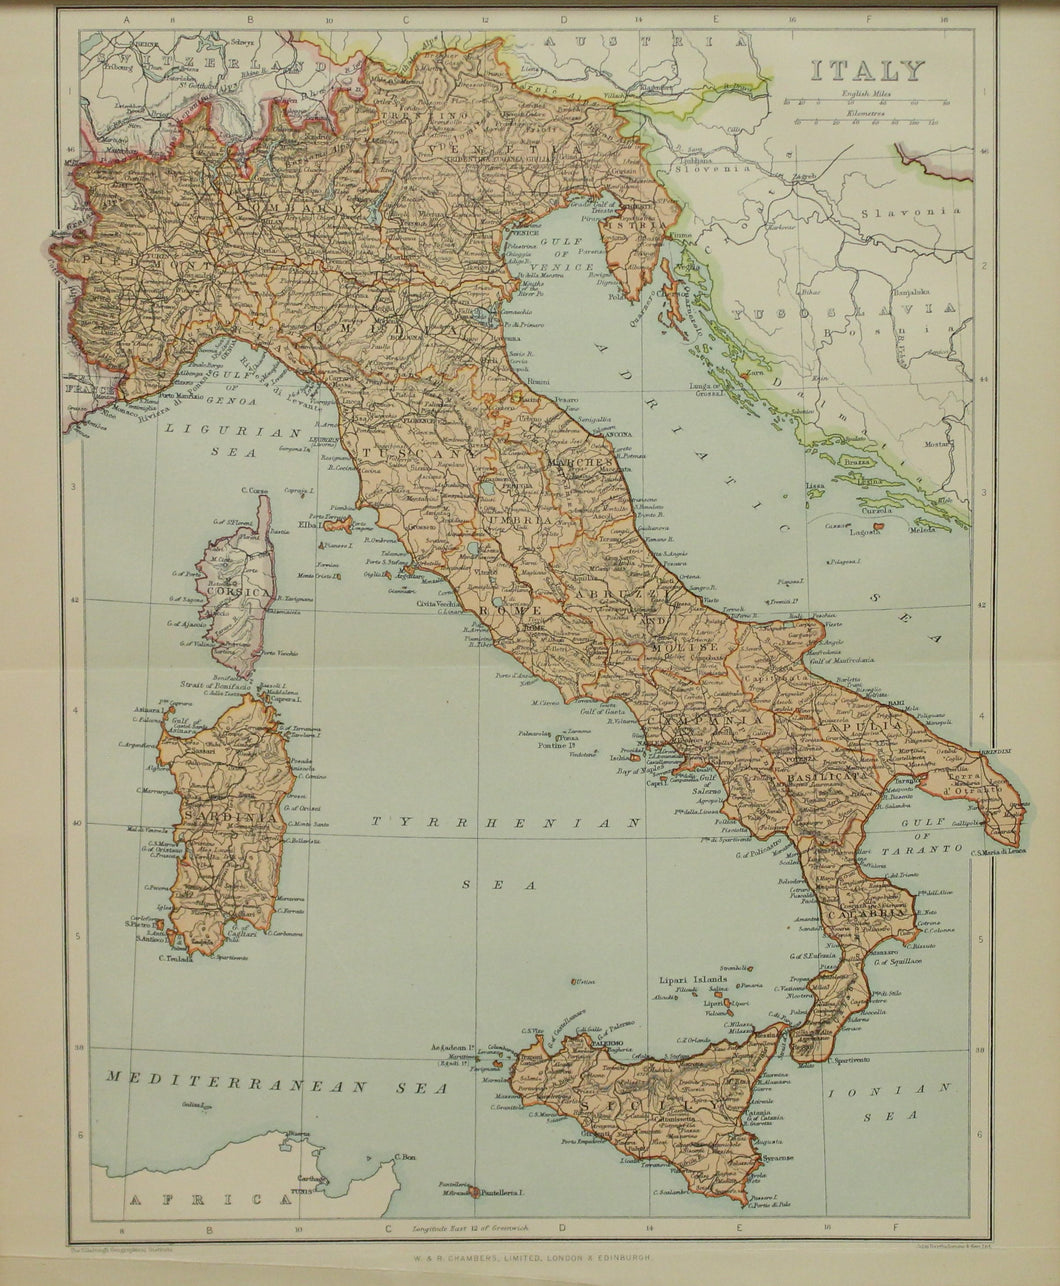 Map, Italy, The Edinburgh Geographical Institute, John Bartholomew and Sons Ltd,  W & R Chambers,